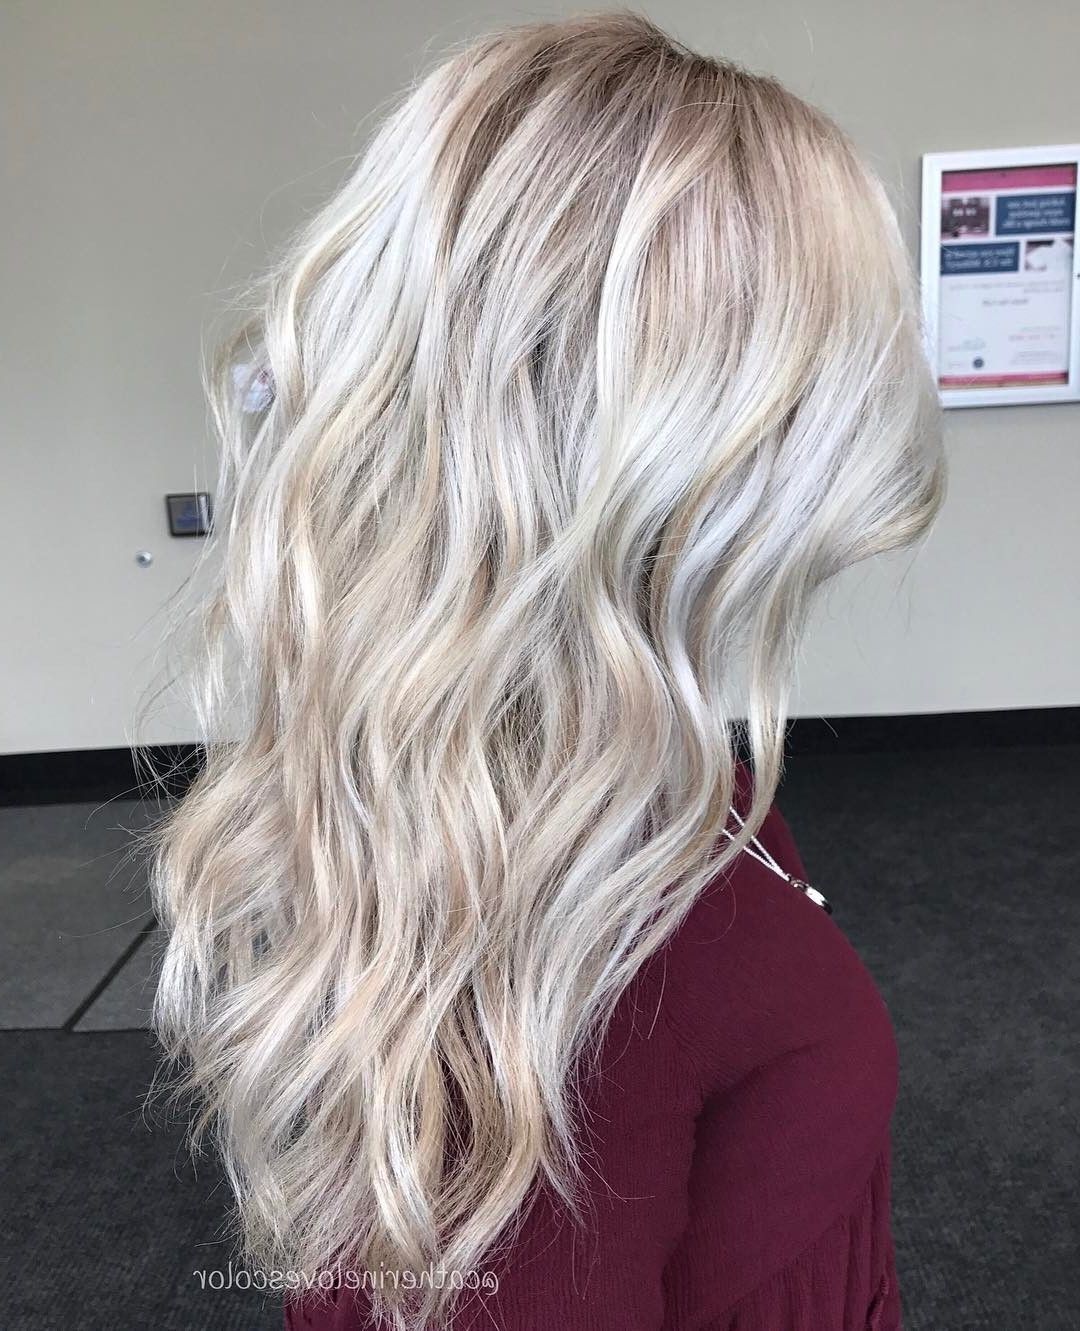 20 Adorable Ash Blonde Hairstyles To Try: Hair Color Ideas 2018 Regarding Popular Platinum Blonde Long Locks Hairstyles (View 7 of 20)